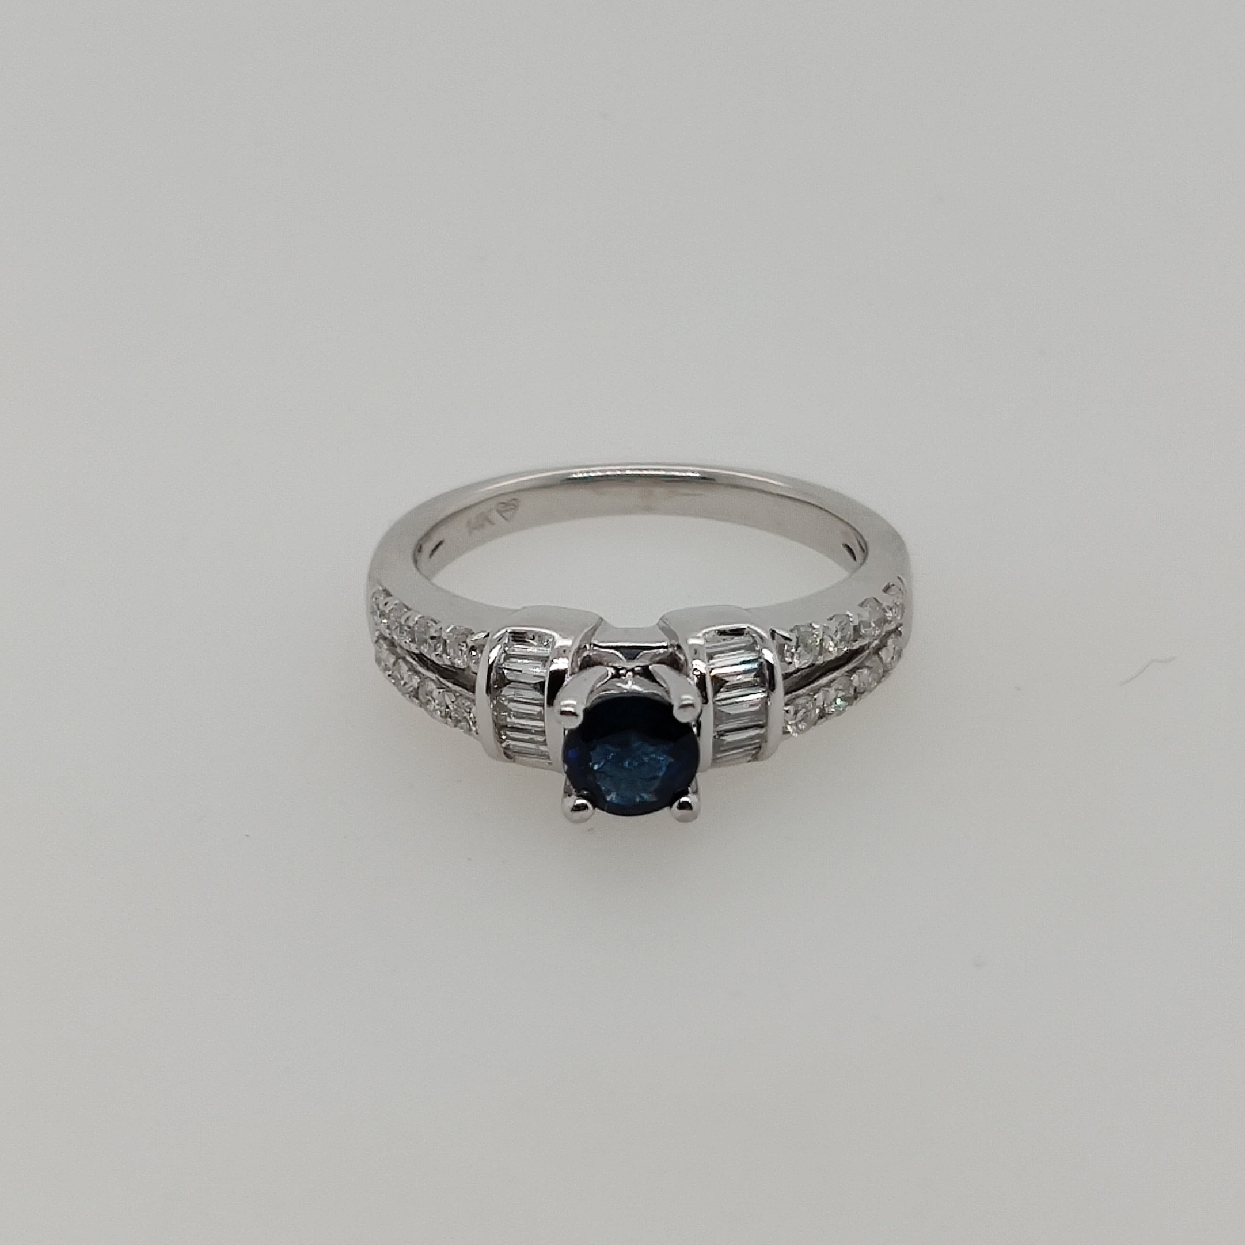 14K White Gold Sapphire and Diamond Ring; Size 7
Sapphire weighs 0.60CT; and Diamonds weigh Approximately 0.32CTTW; H-I/I1

Appraisal on File